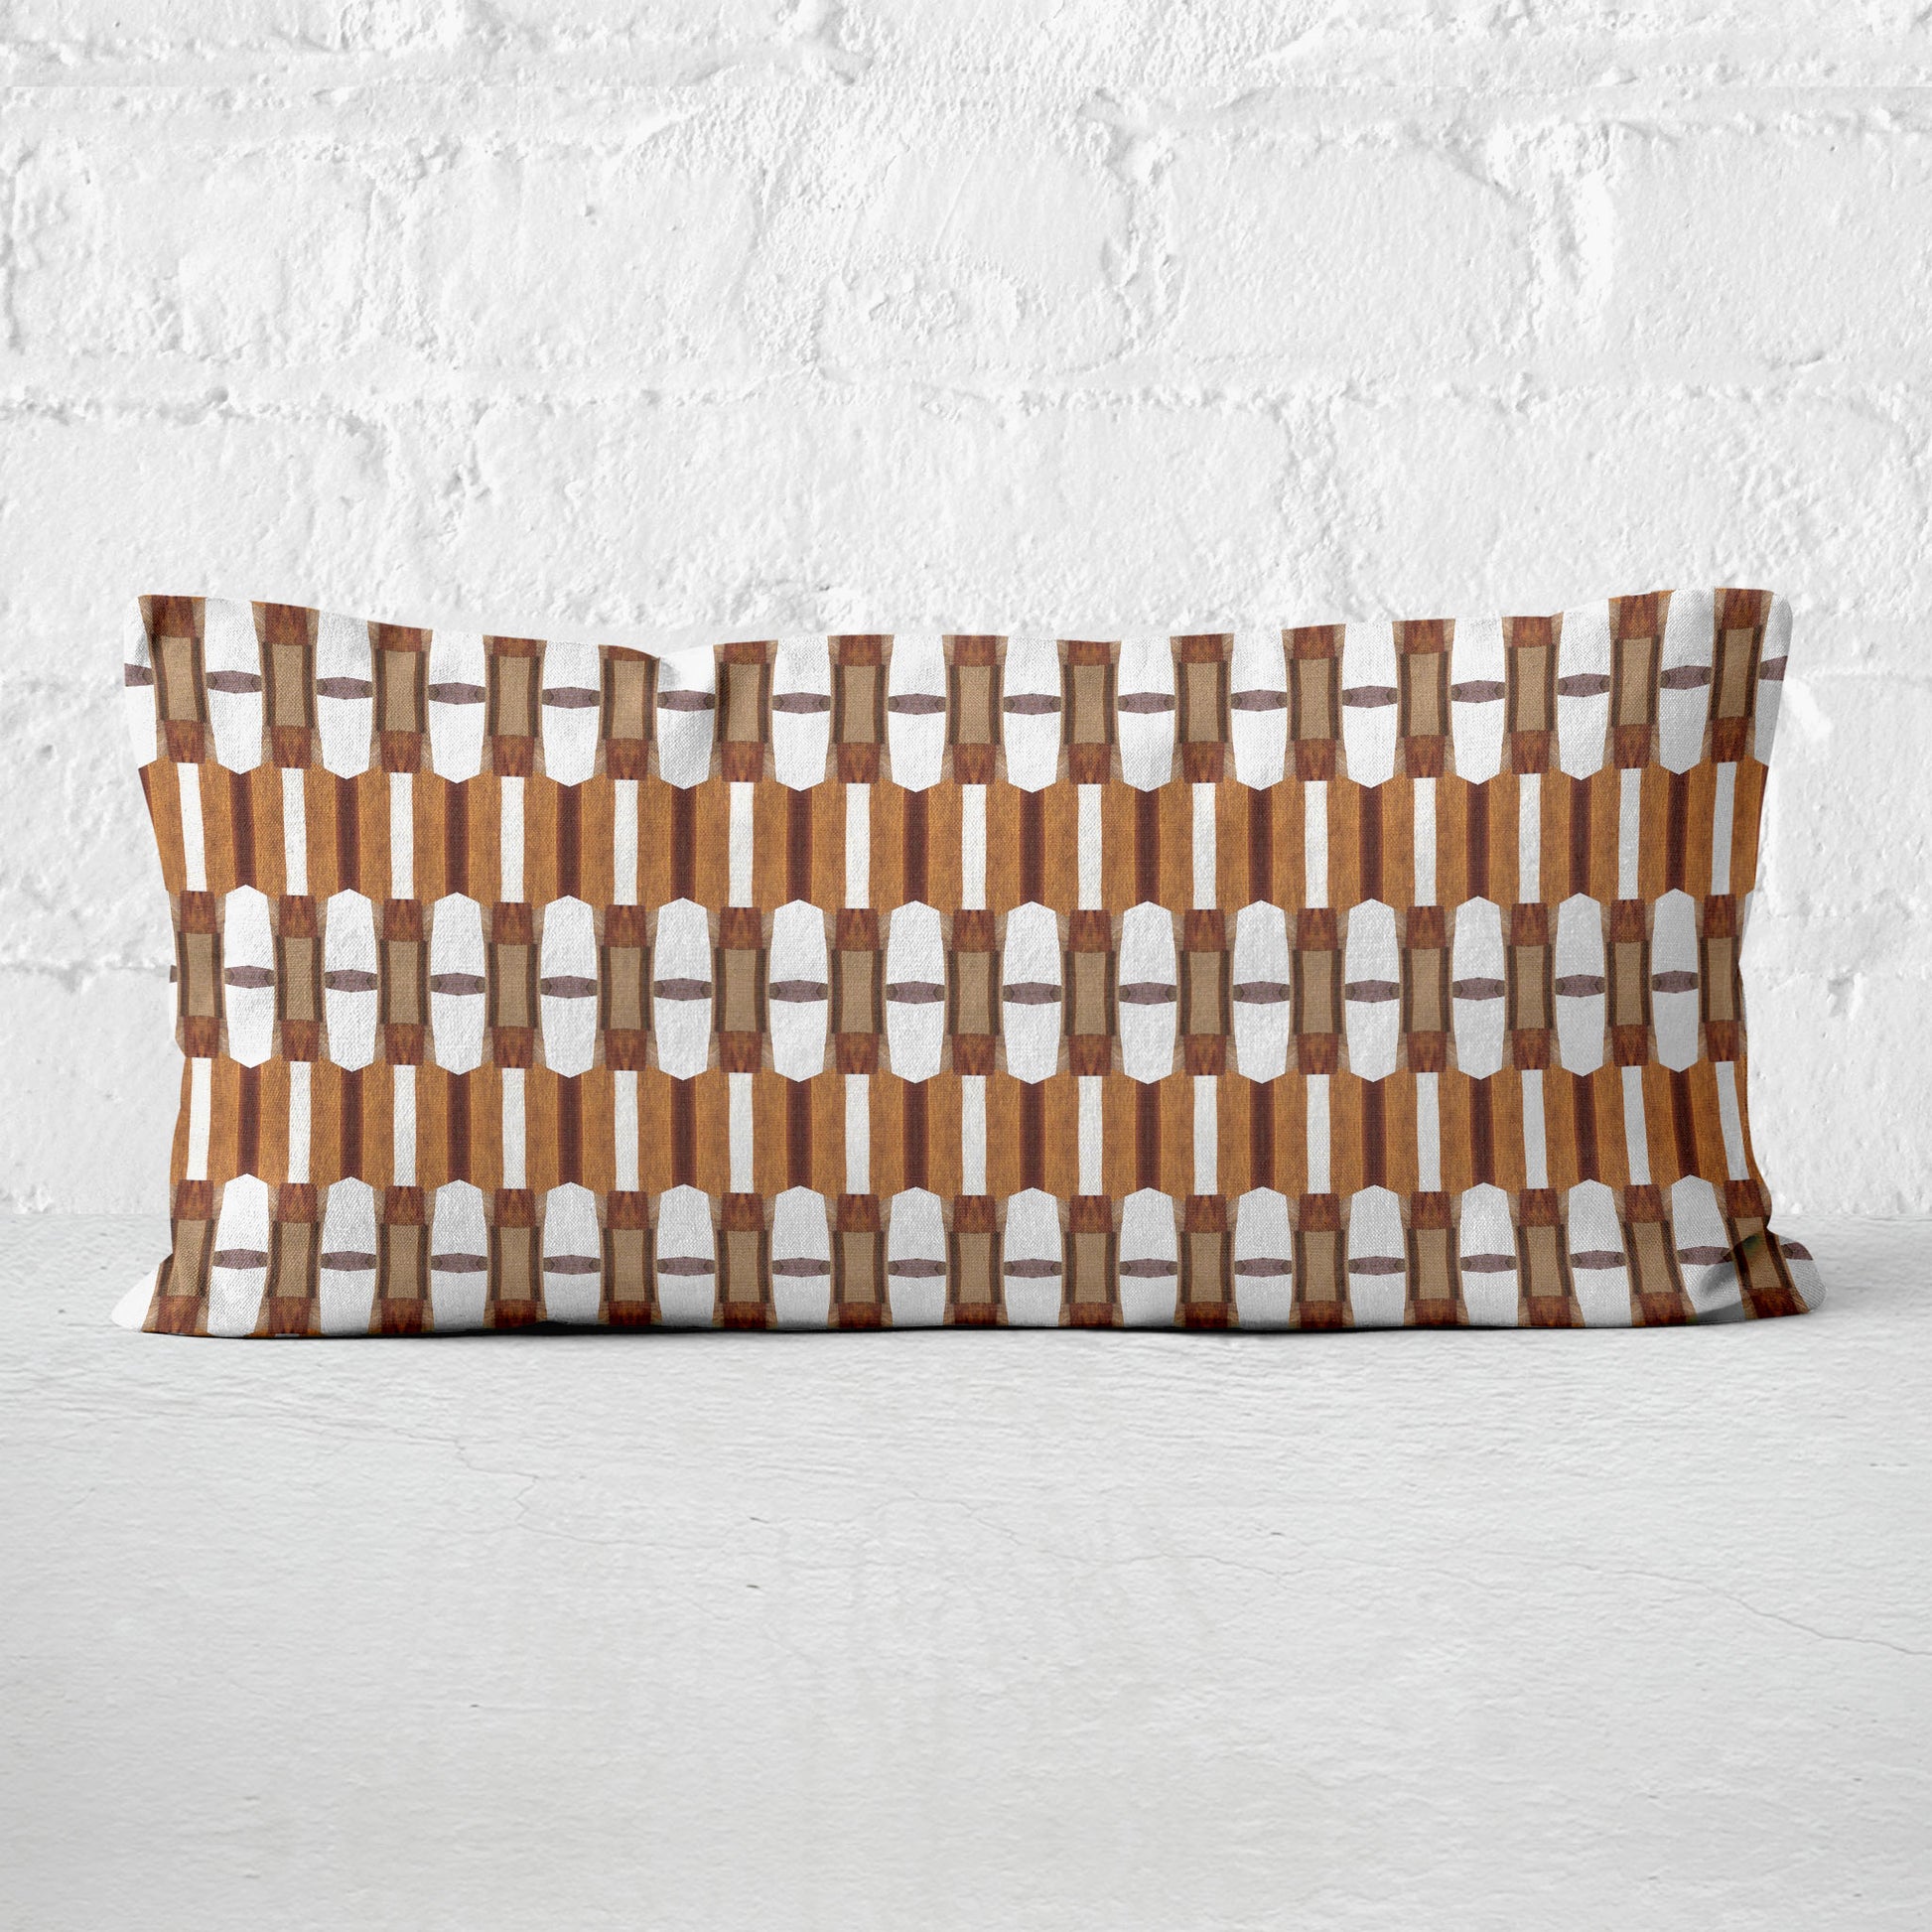 12x24 Lumbar pillow featuring a brown and white collaged pattern leaning against a white brick wall